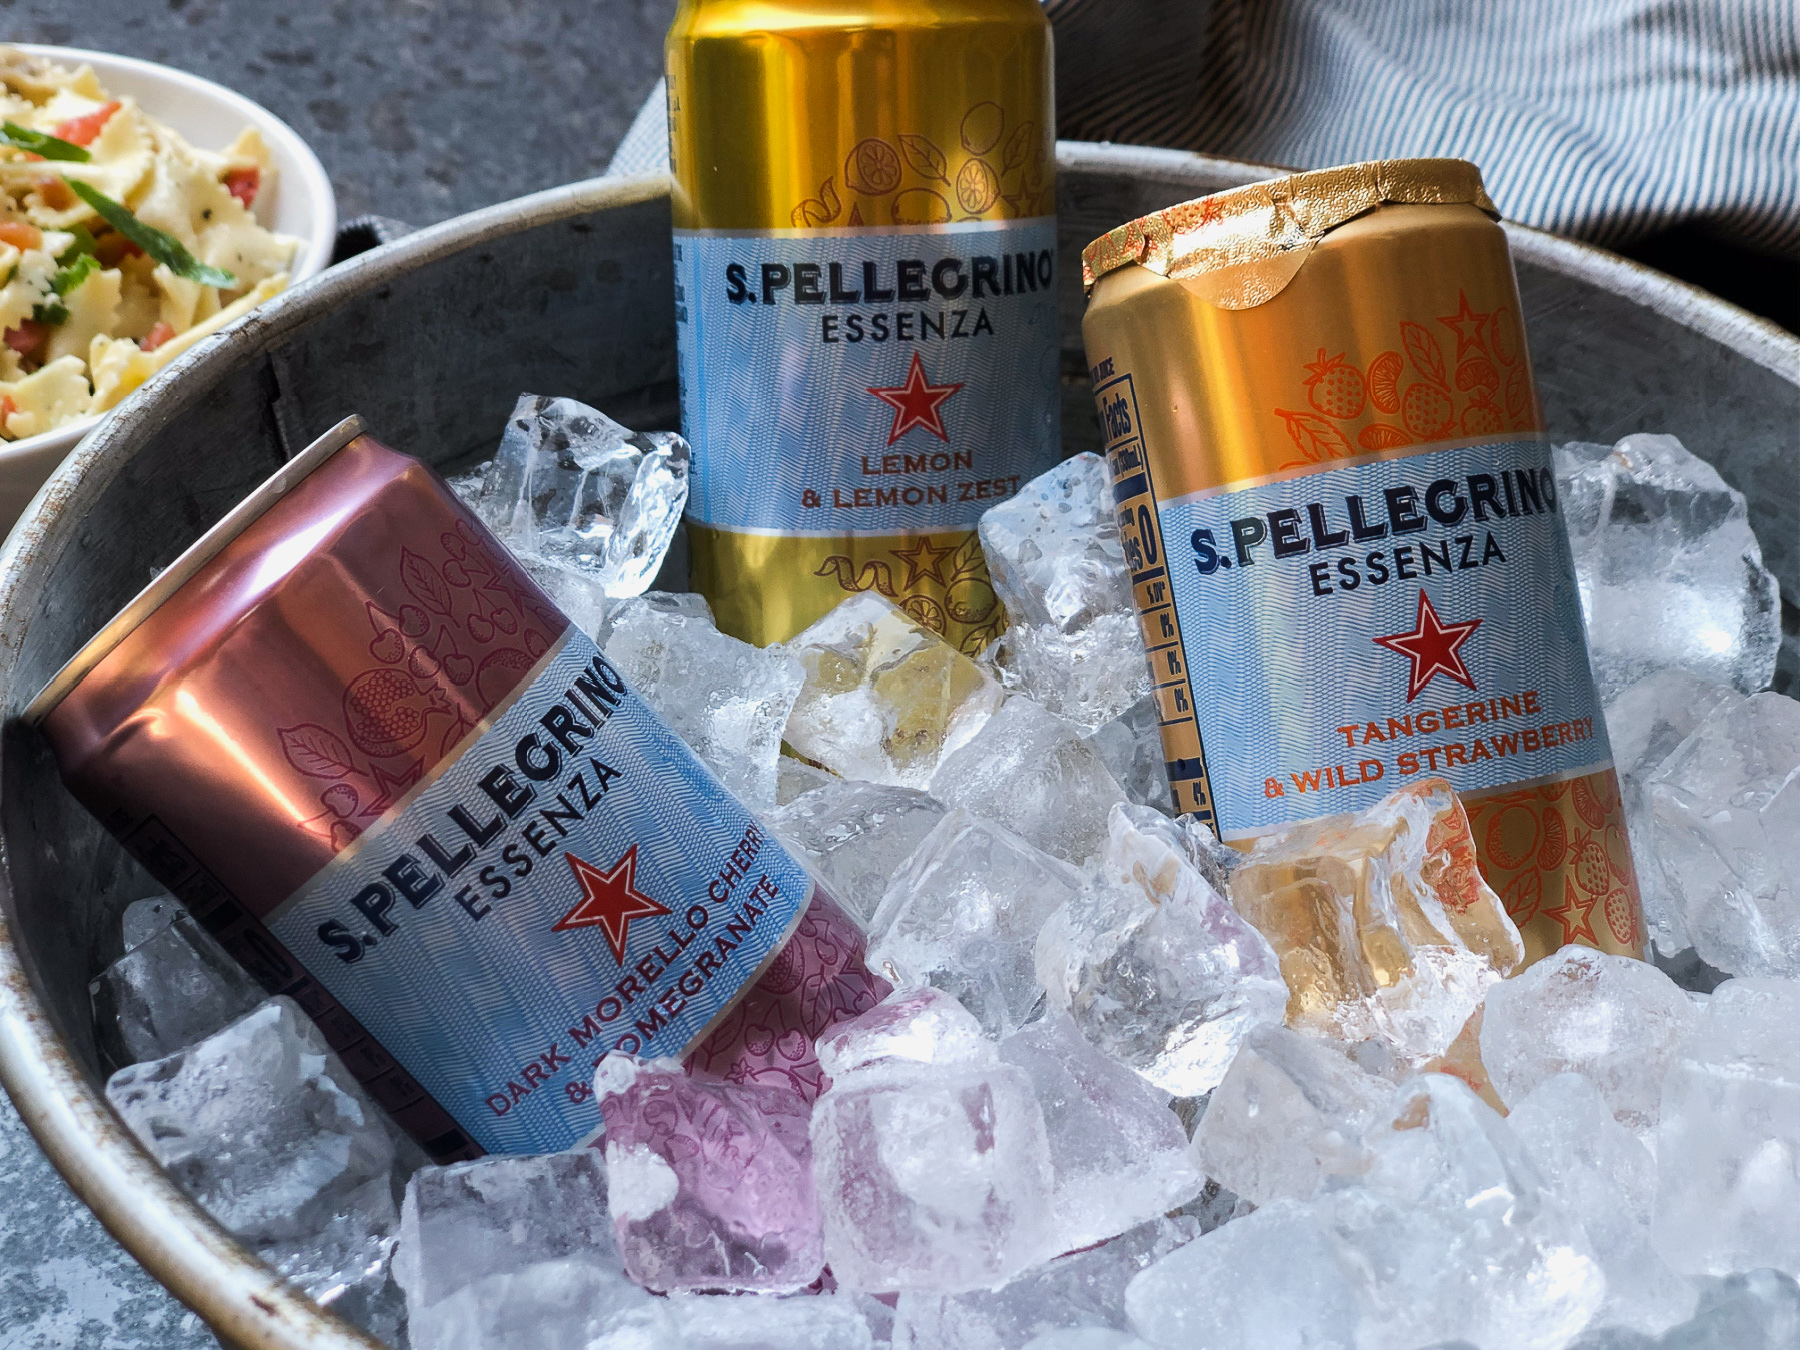 Add A Twist Of Flavor To Any Occasion With S.Pellegrino Essenza on I Heart Publix